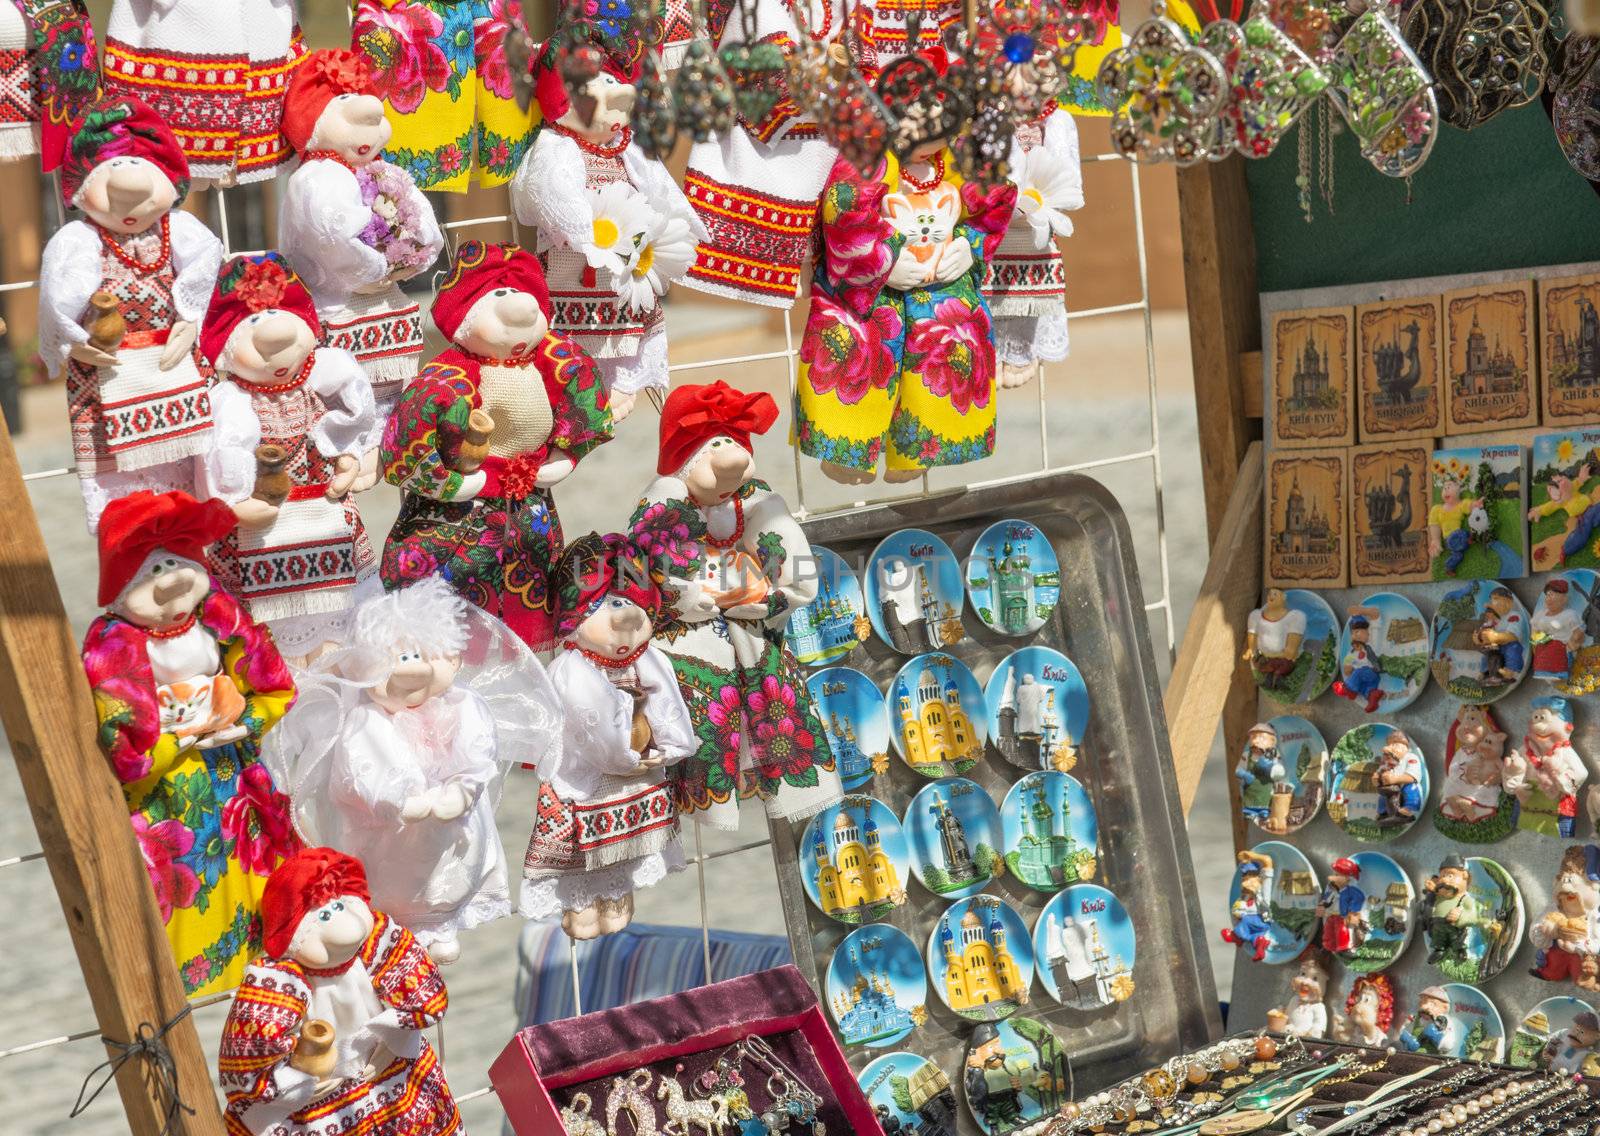 The traditional ukrainan souvenirs in the gift shop in Kiev. Taken on August 2012.